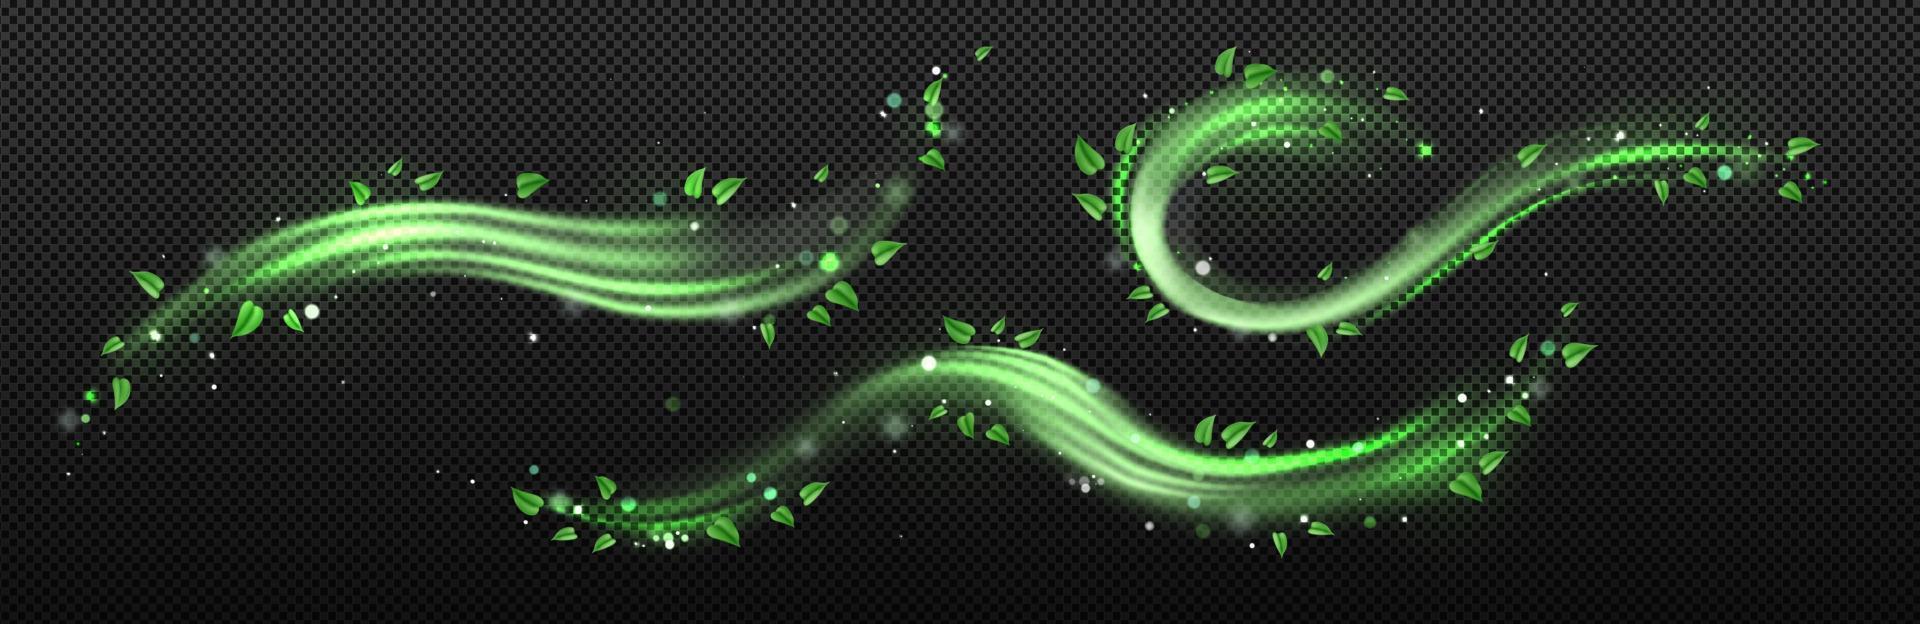 Abstract wind swirl with green leaves and sparkles vector